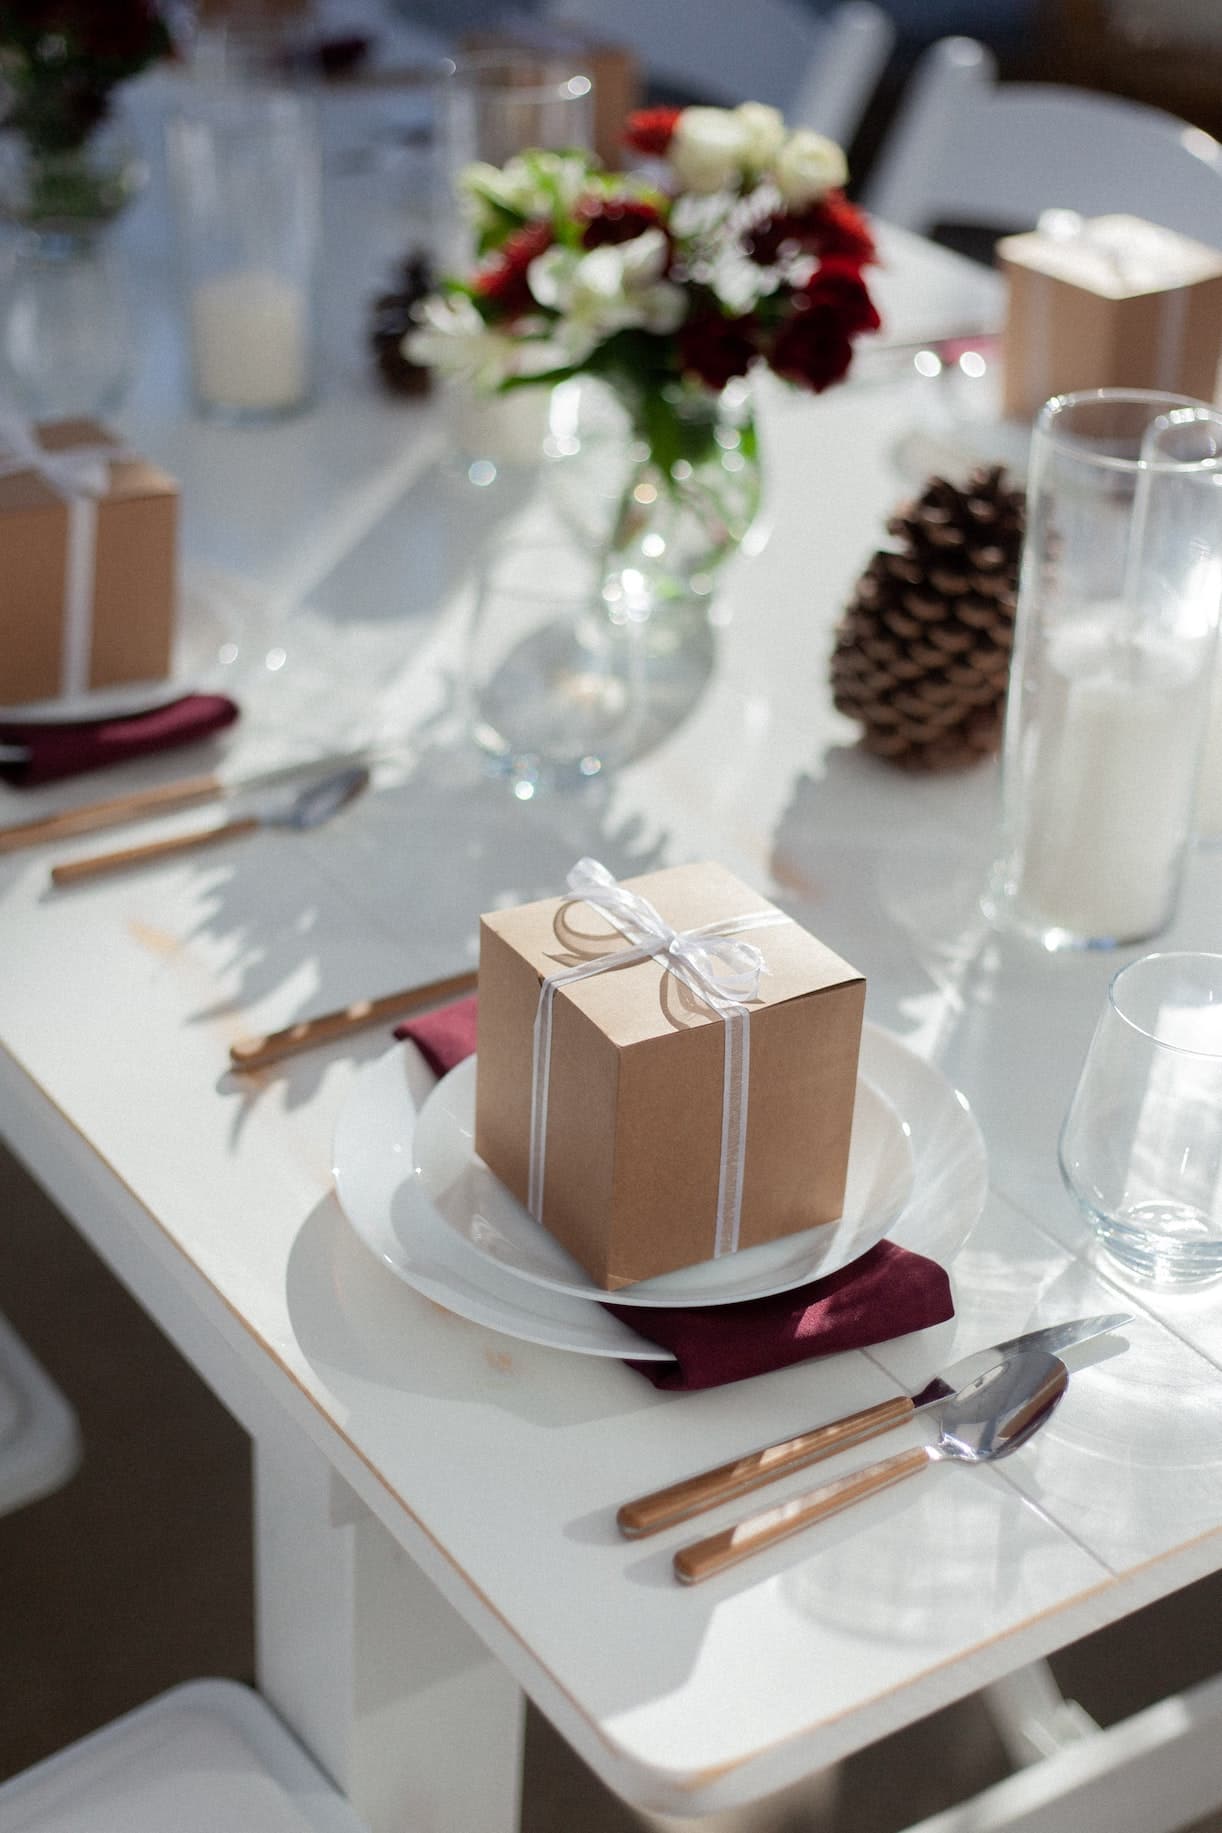 Practical Wedding Favor Wrapped in Boxes